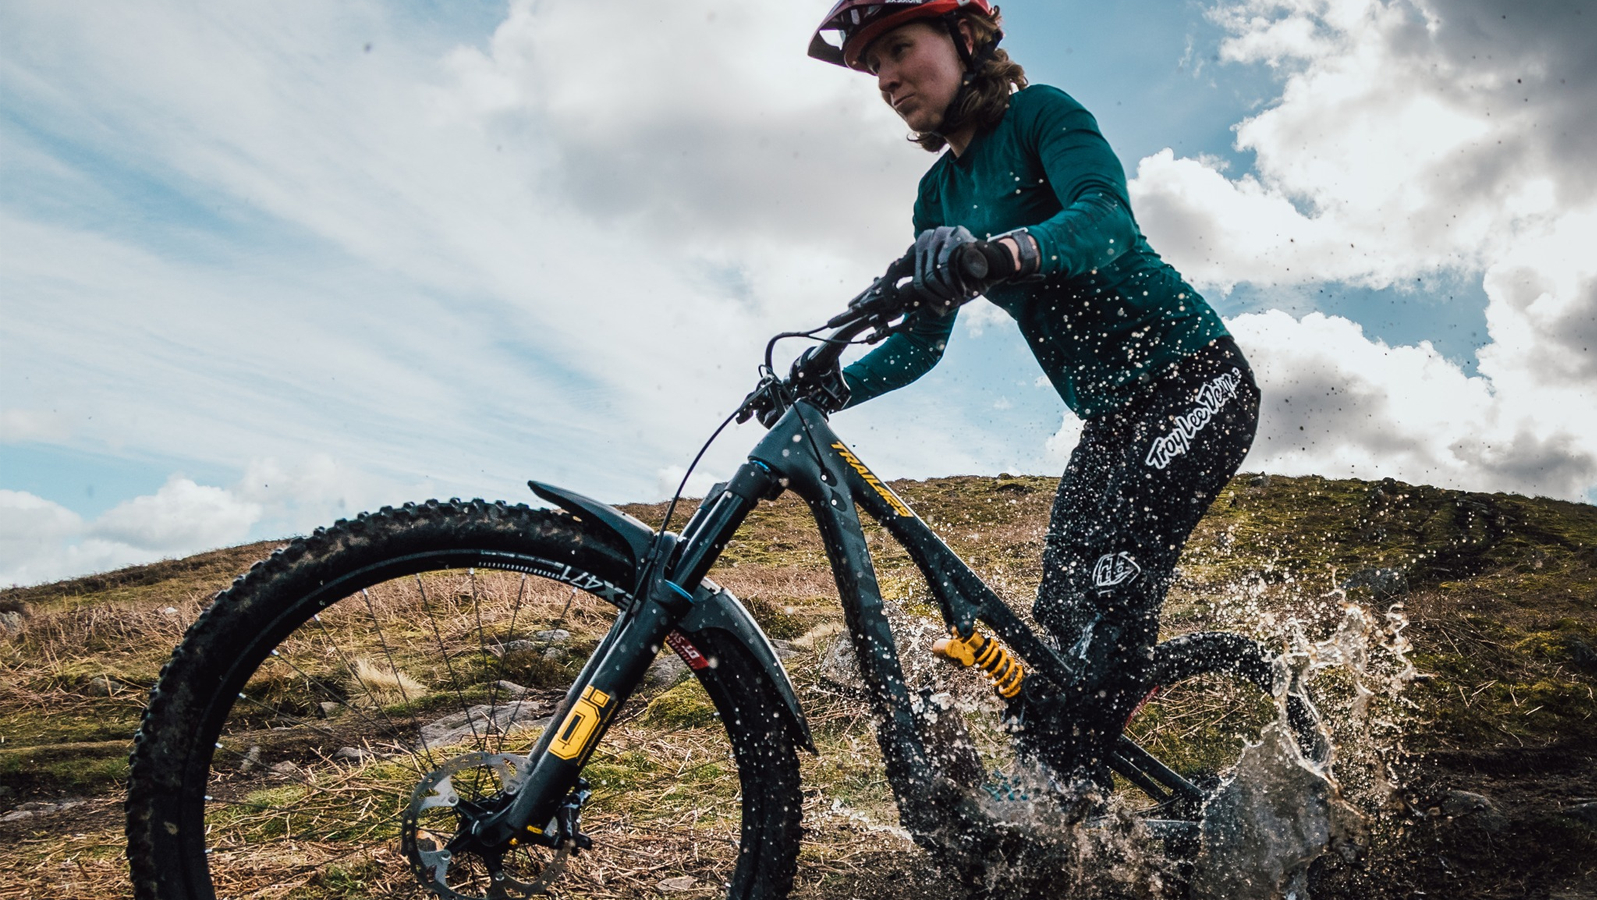 Best Mudguards: Buying Guide To Protect The Rear